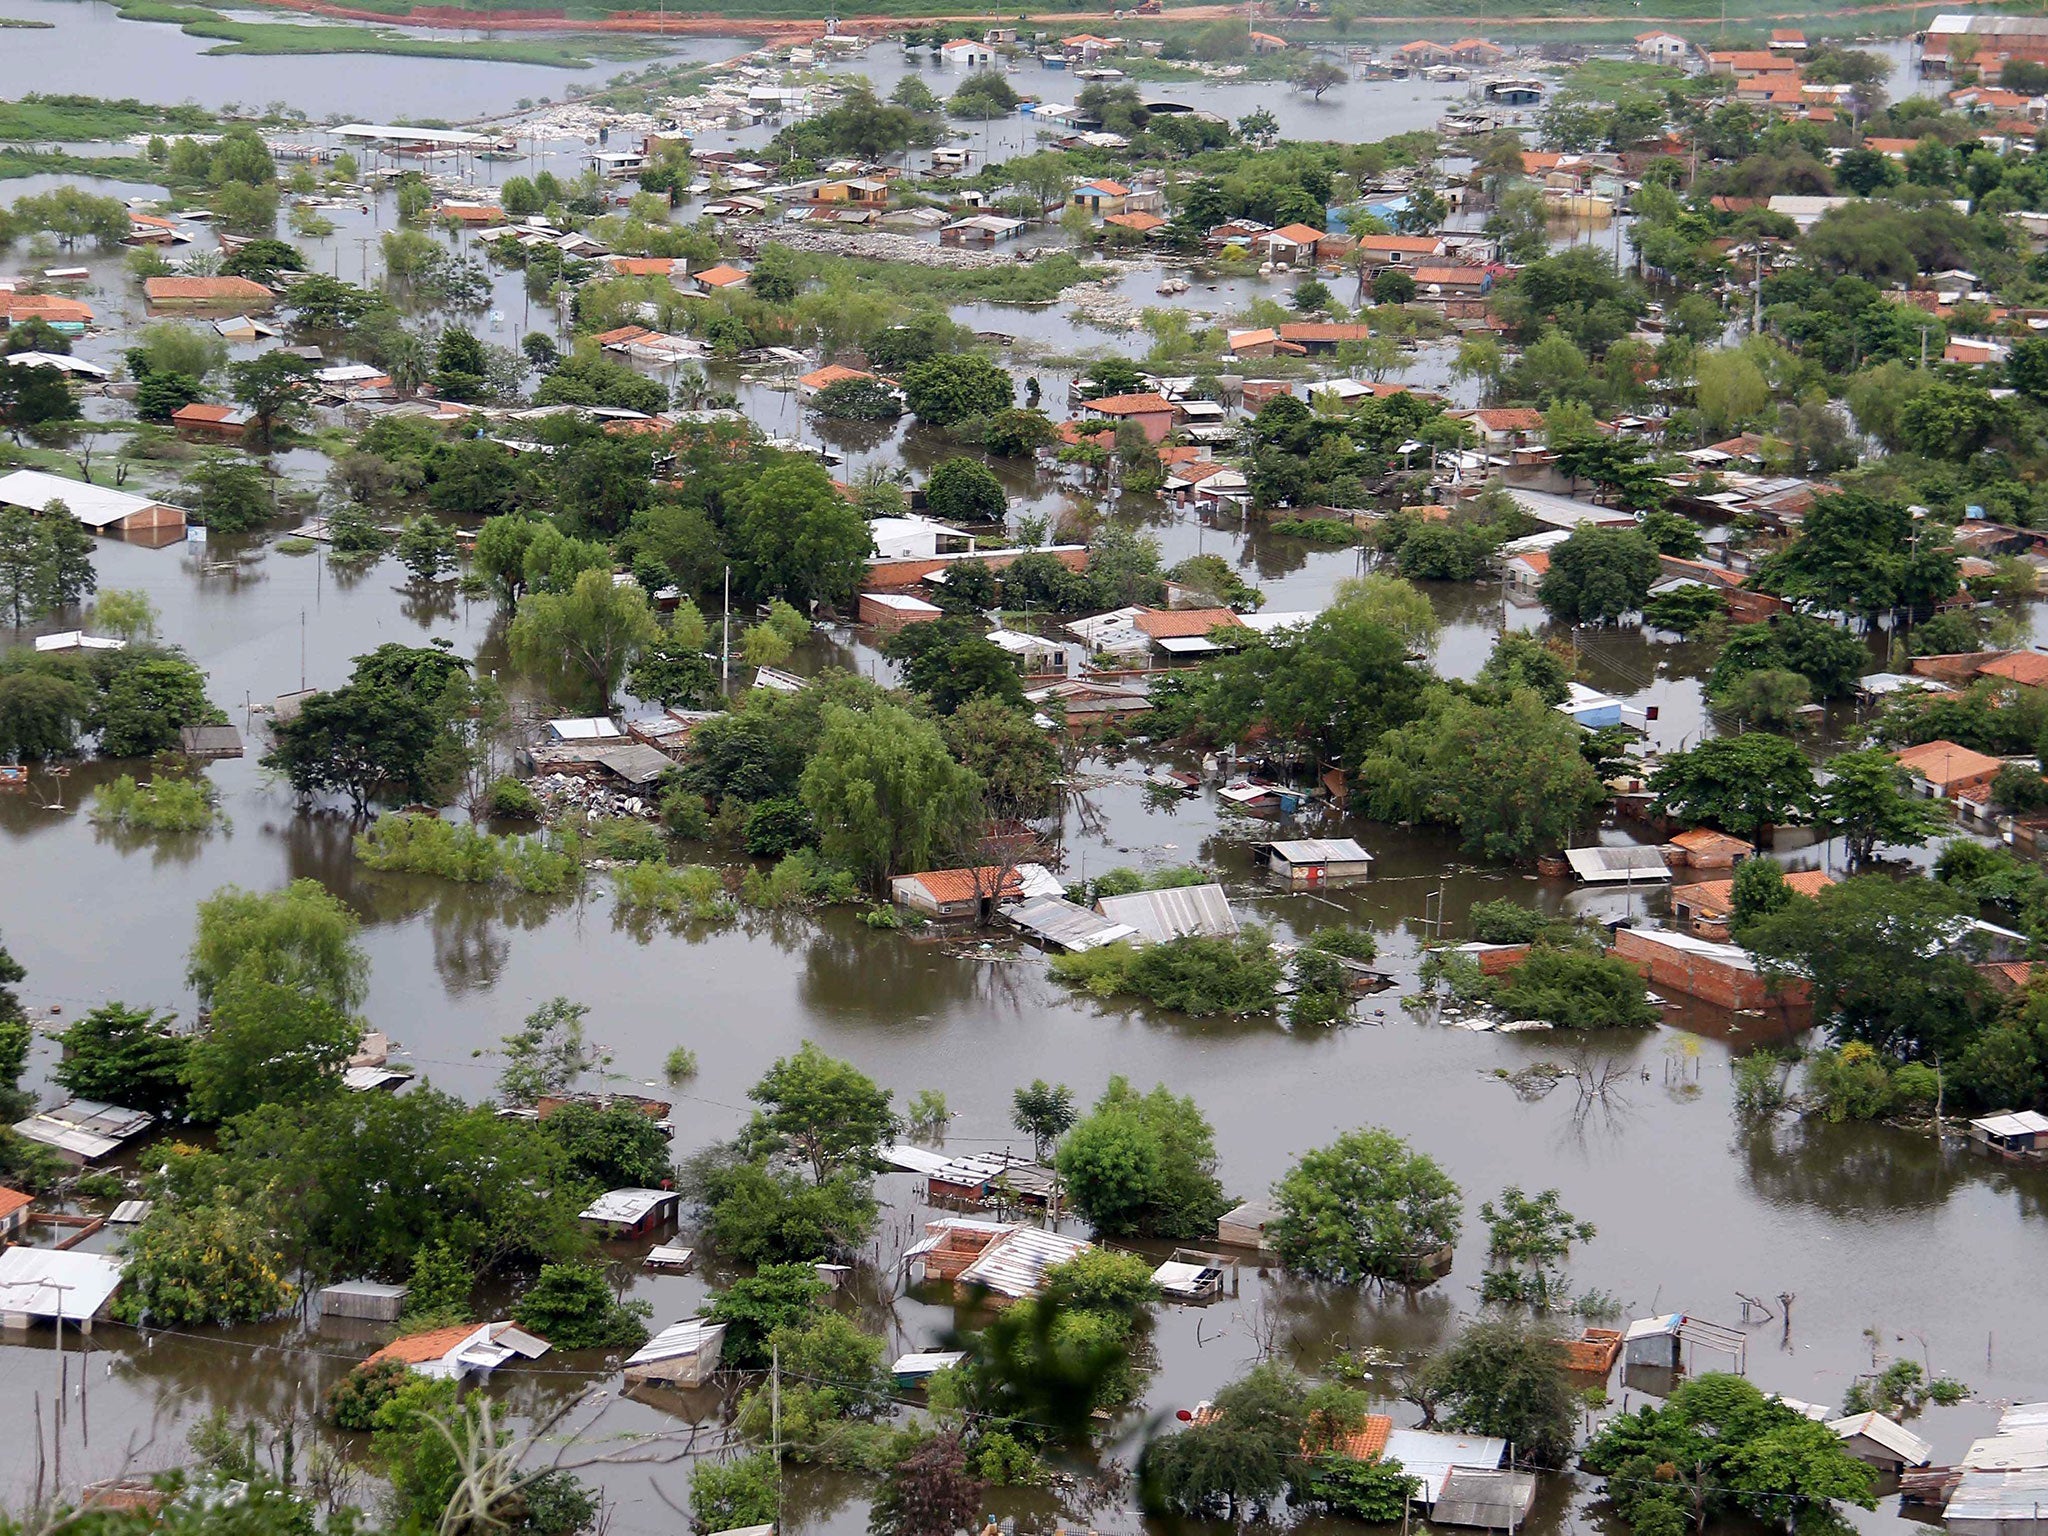 Floods in Asuncion, in Paraguay have left 100,000 people homeless